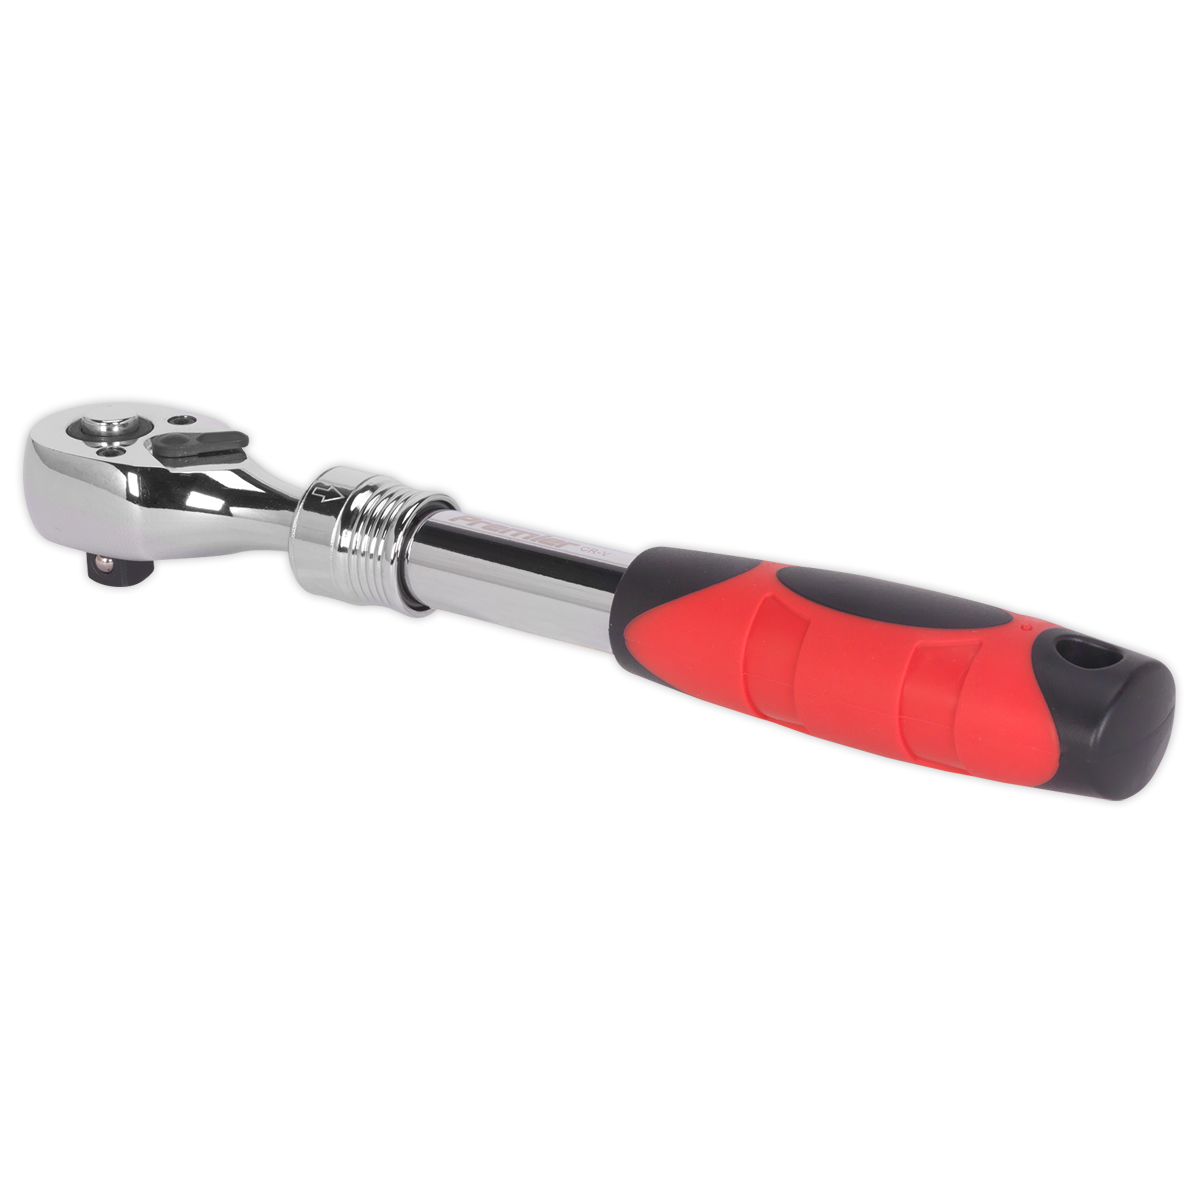 Sealey Ratchet Wrench 3/8"Sq Drive Extendable